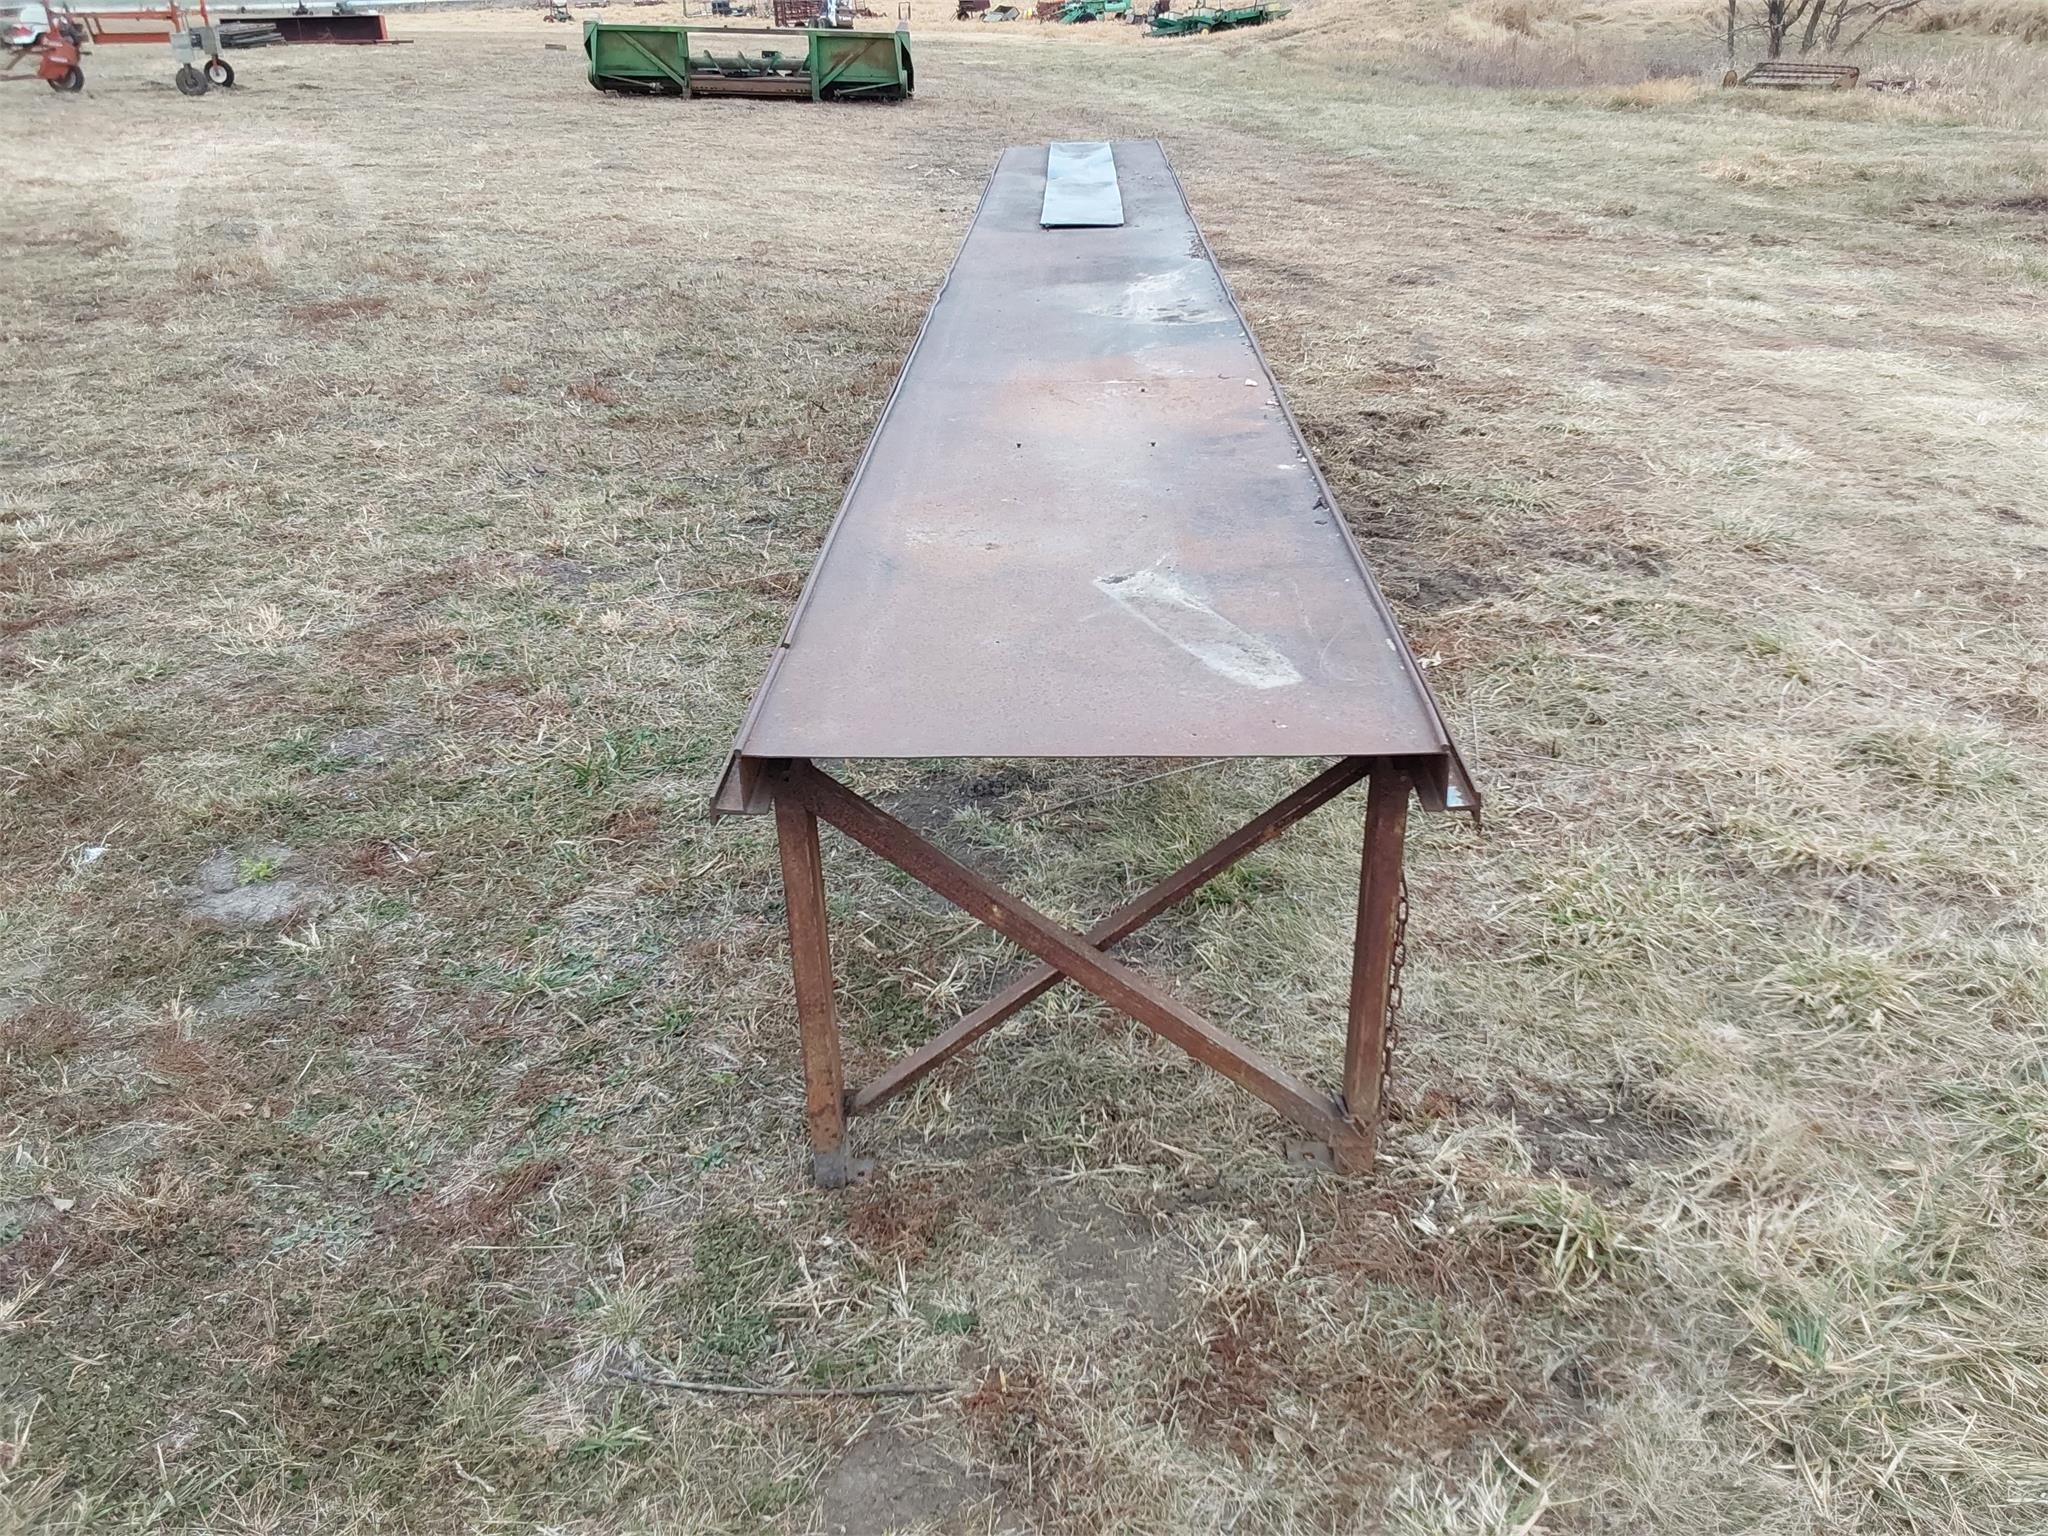 Stainless Steel Tables & Workbenches for sale in Badger, South Dakota